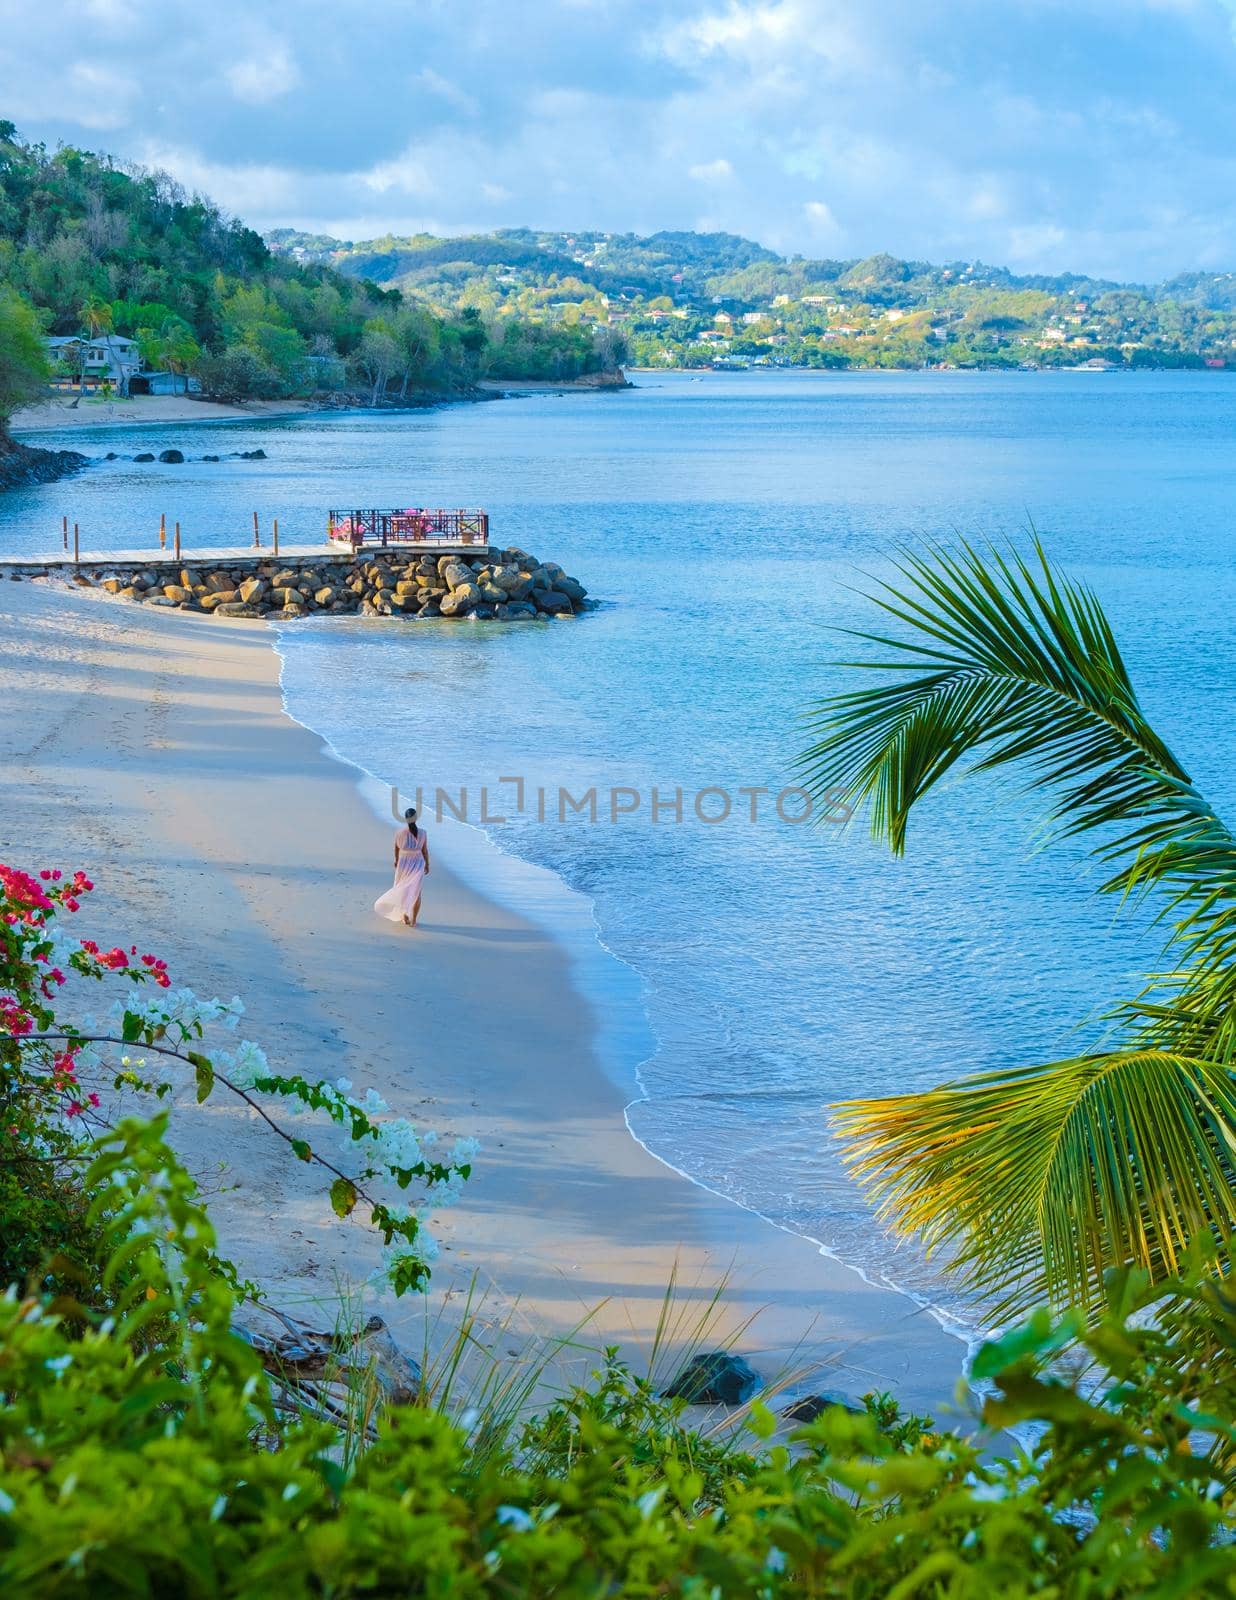 Asian women walking at the beach on vacation in Saint Lucia, luxury holiday Saint Lucia Caribbean, women on vacation at the tropical Island of Saint Lucia Caribbean. Calabash beach St Lucia Caribbean